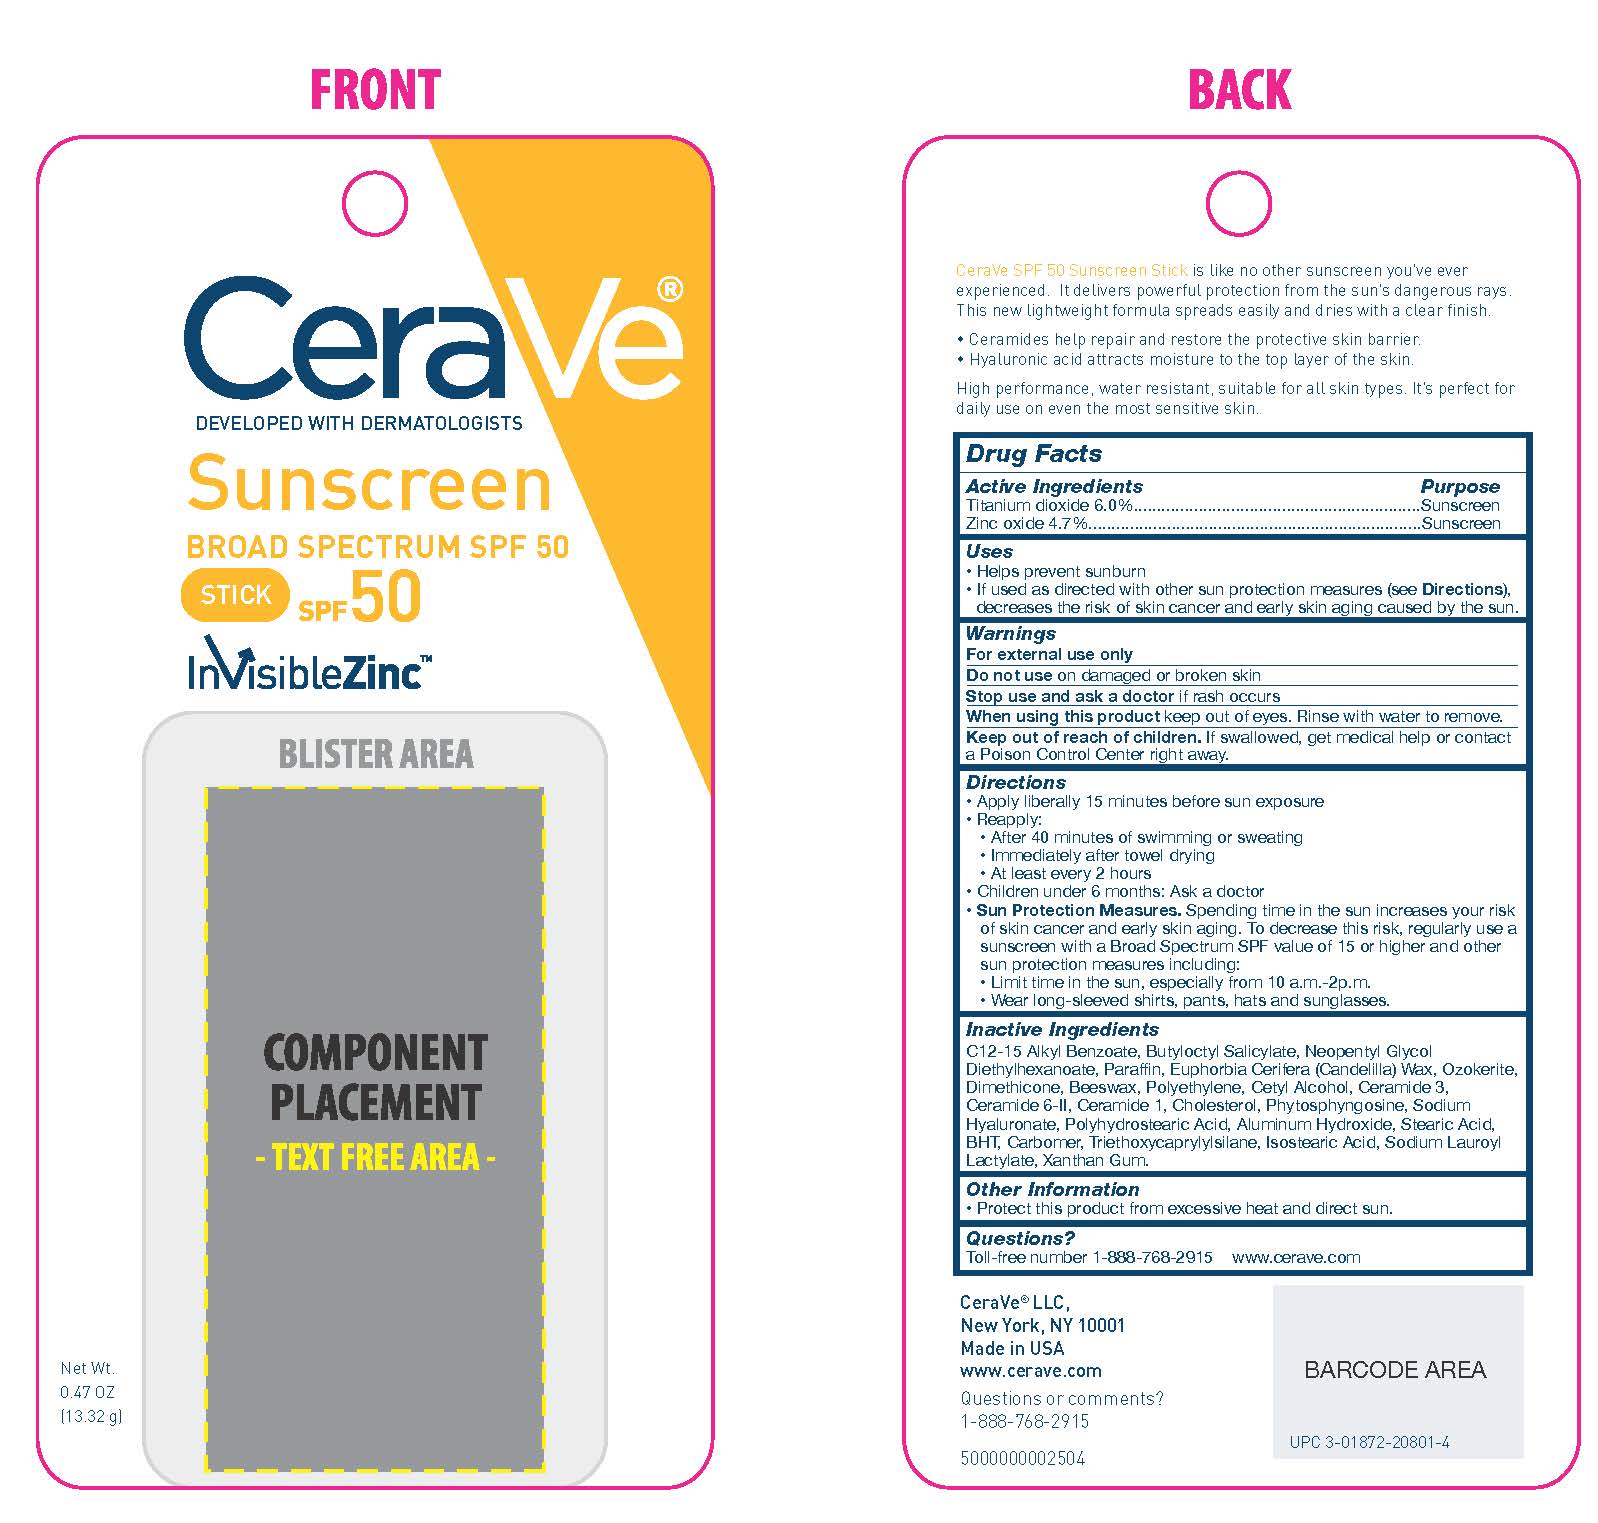 Cerave Developed With Dermatologists Sunscreen Broad Spectrum Spf 50 Breastfeeding